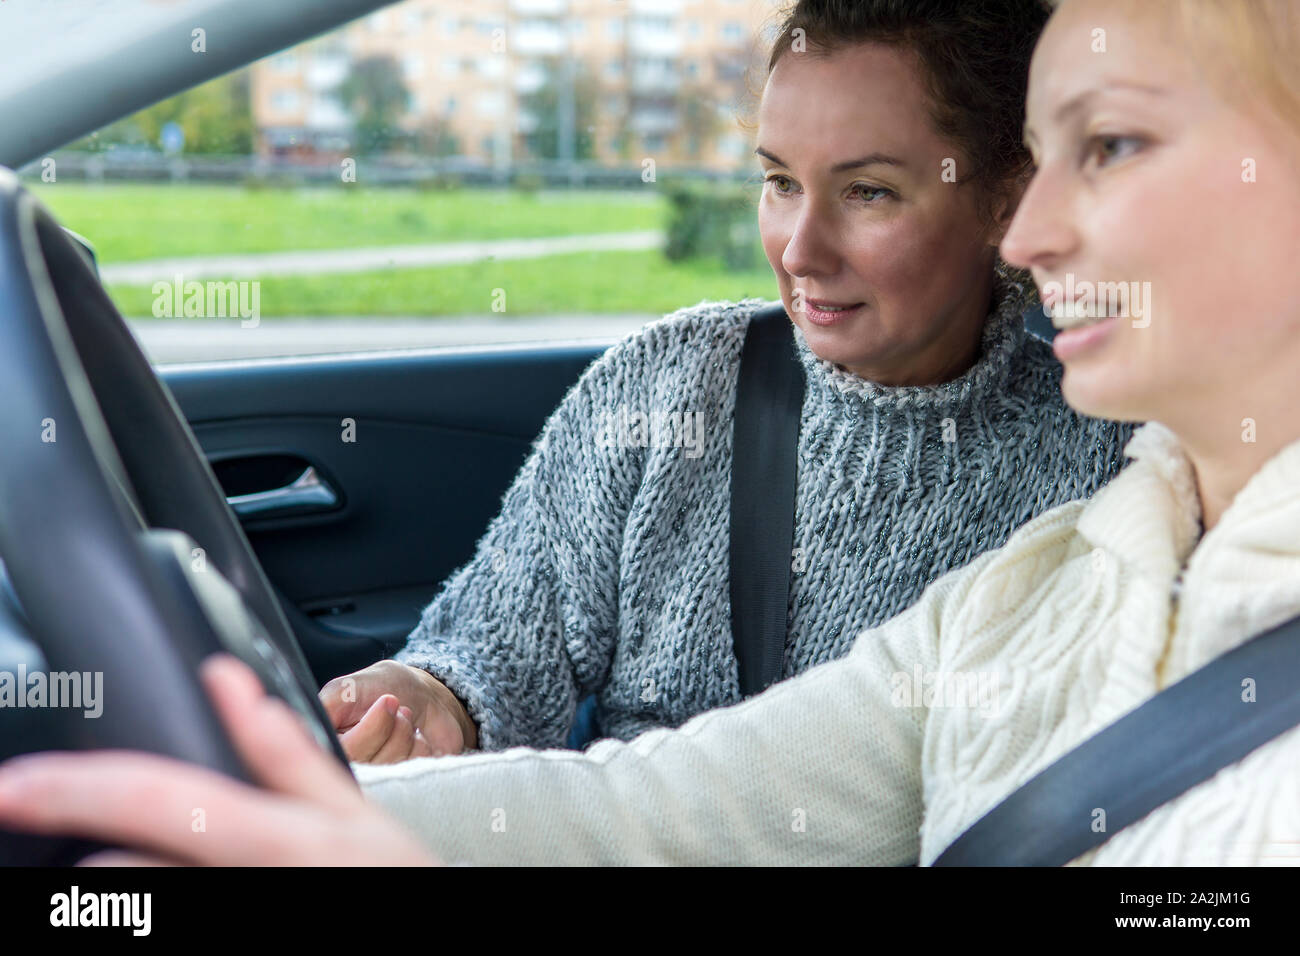 female driving instructor conducts a practical lesson with a female student Stock Photo